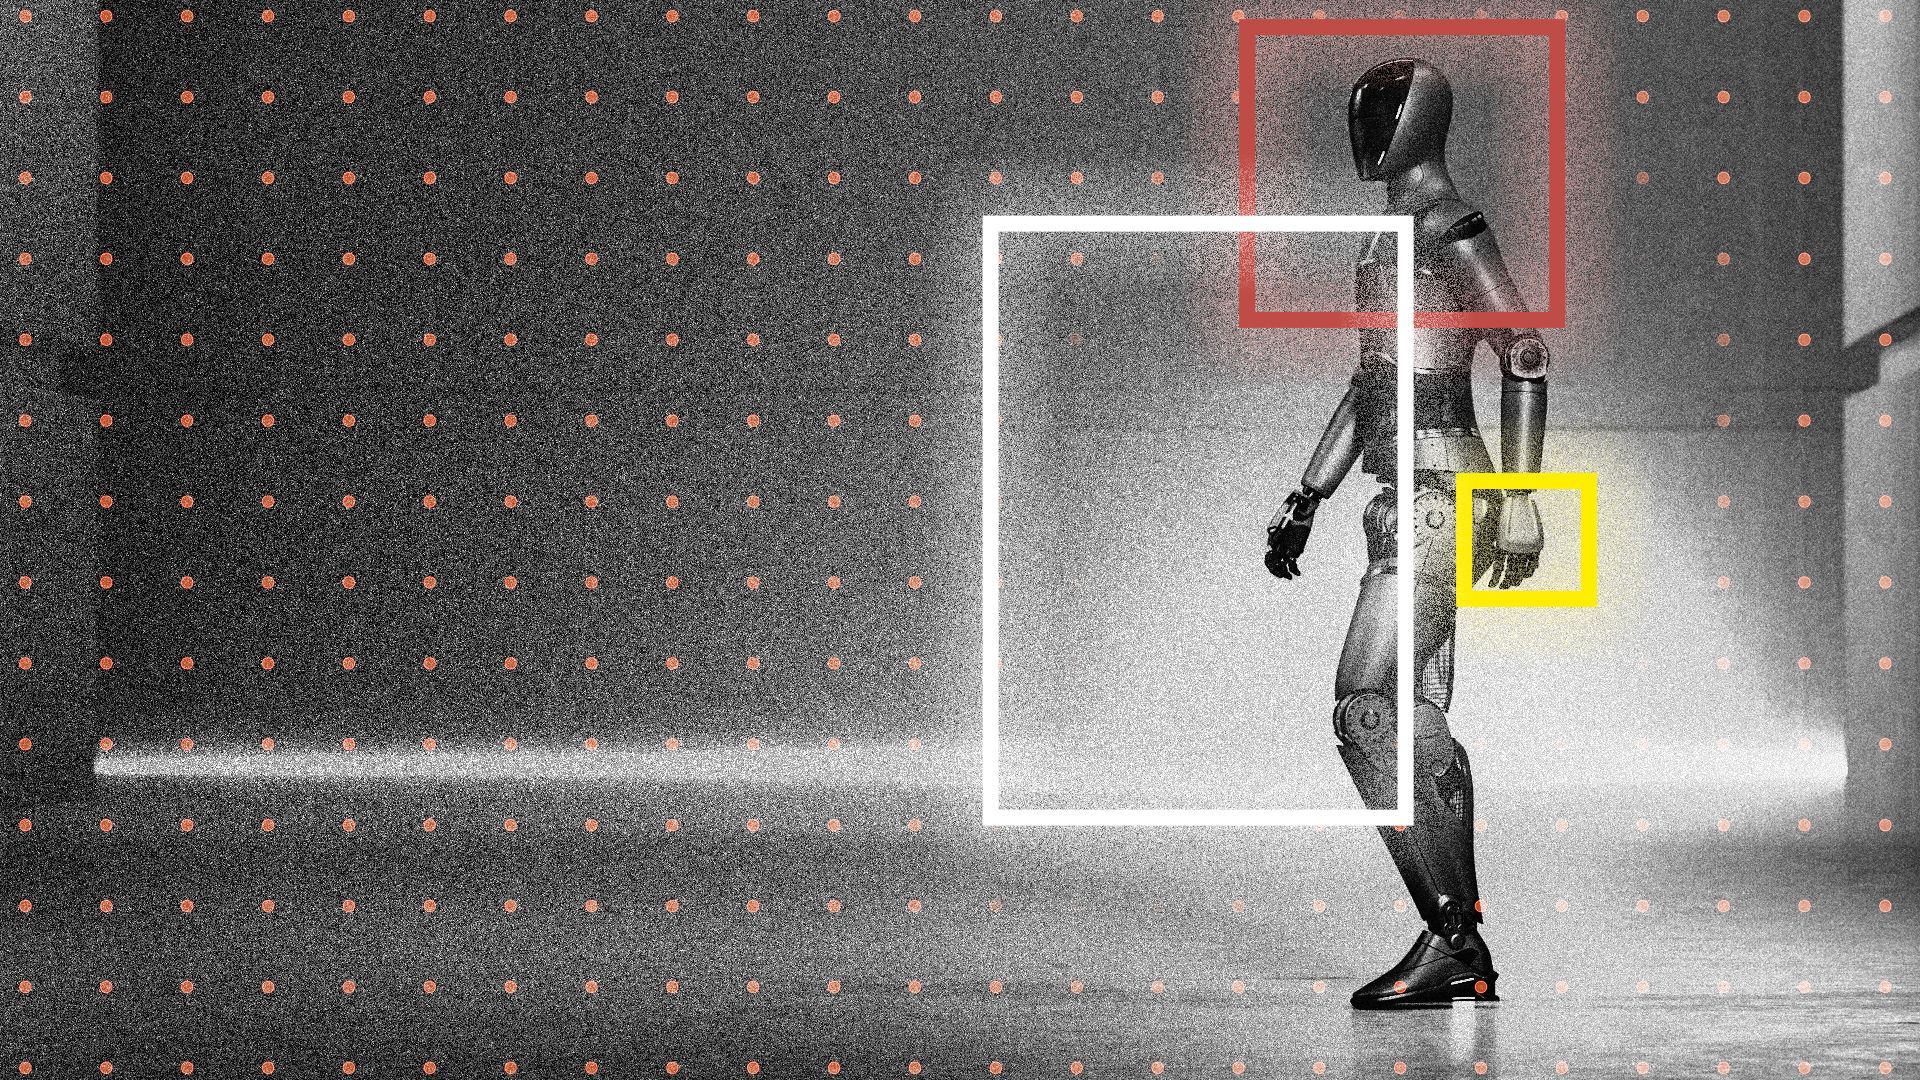 Photo illustration of a humanoid robot with squares highlighting areas of the photograph.